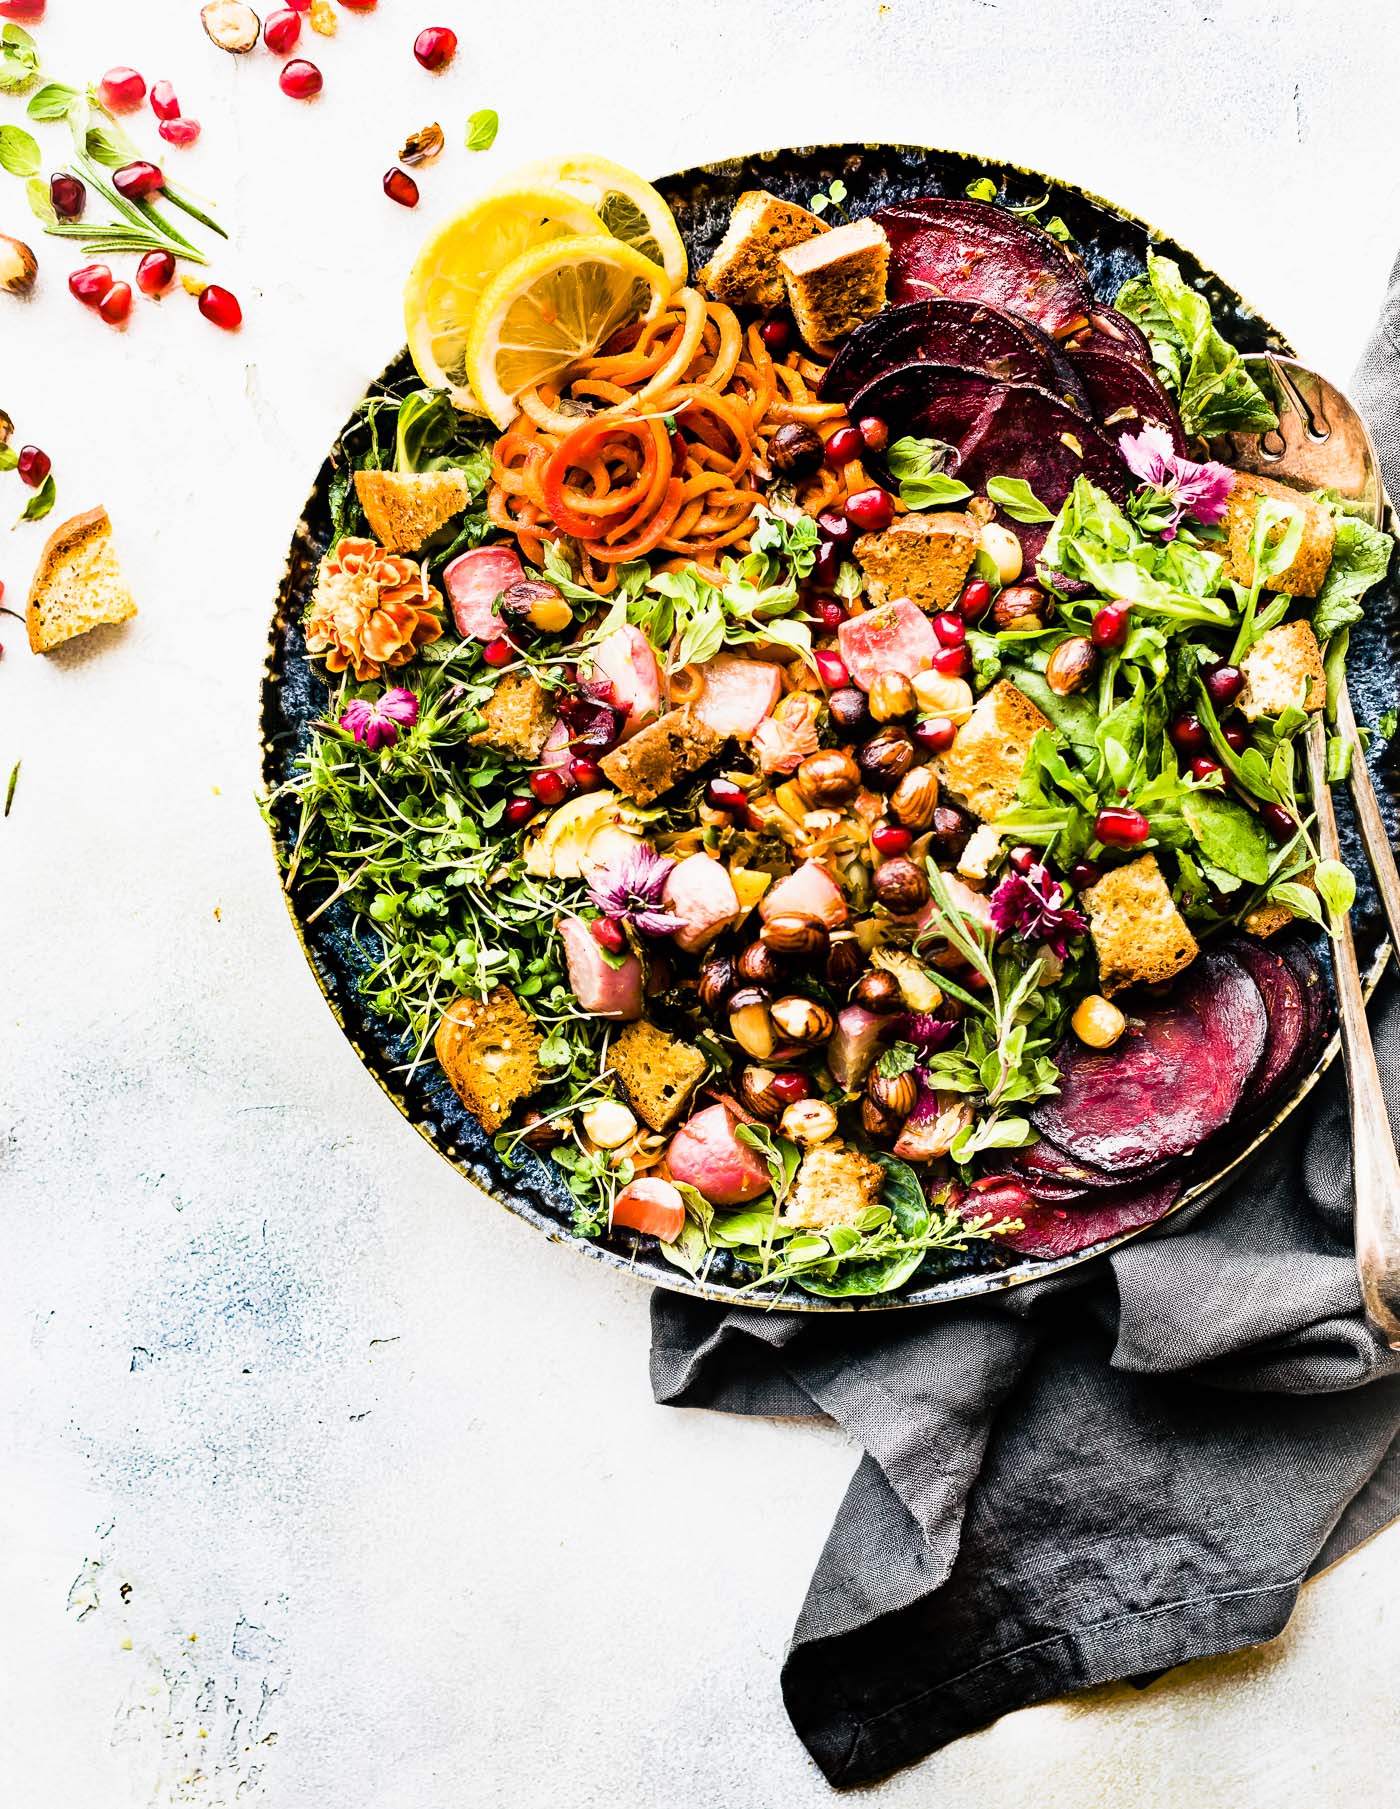 ROASTED VEGETABLE PANZANELLA FALL SALAD. An Autumn inspired dish to make the most of those seasonal vegetables. Nourishing, gluten free, deliciously dairy free, simple to make!